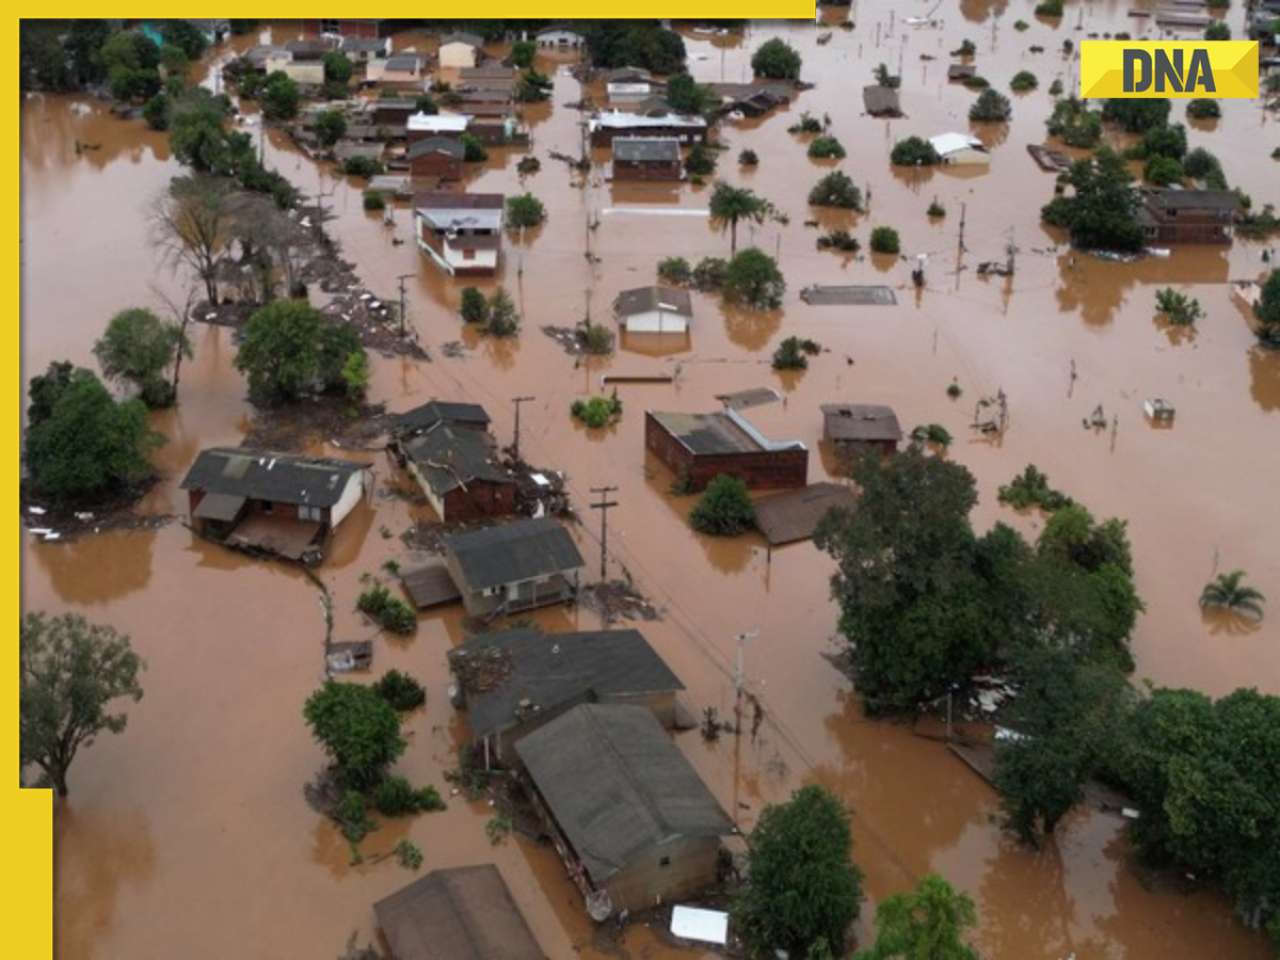 At least 56 people killed due to torrential rains, floods in Brazil